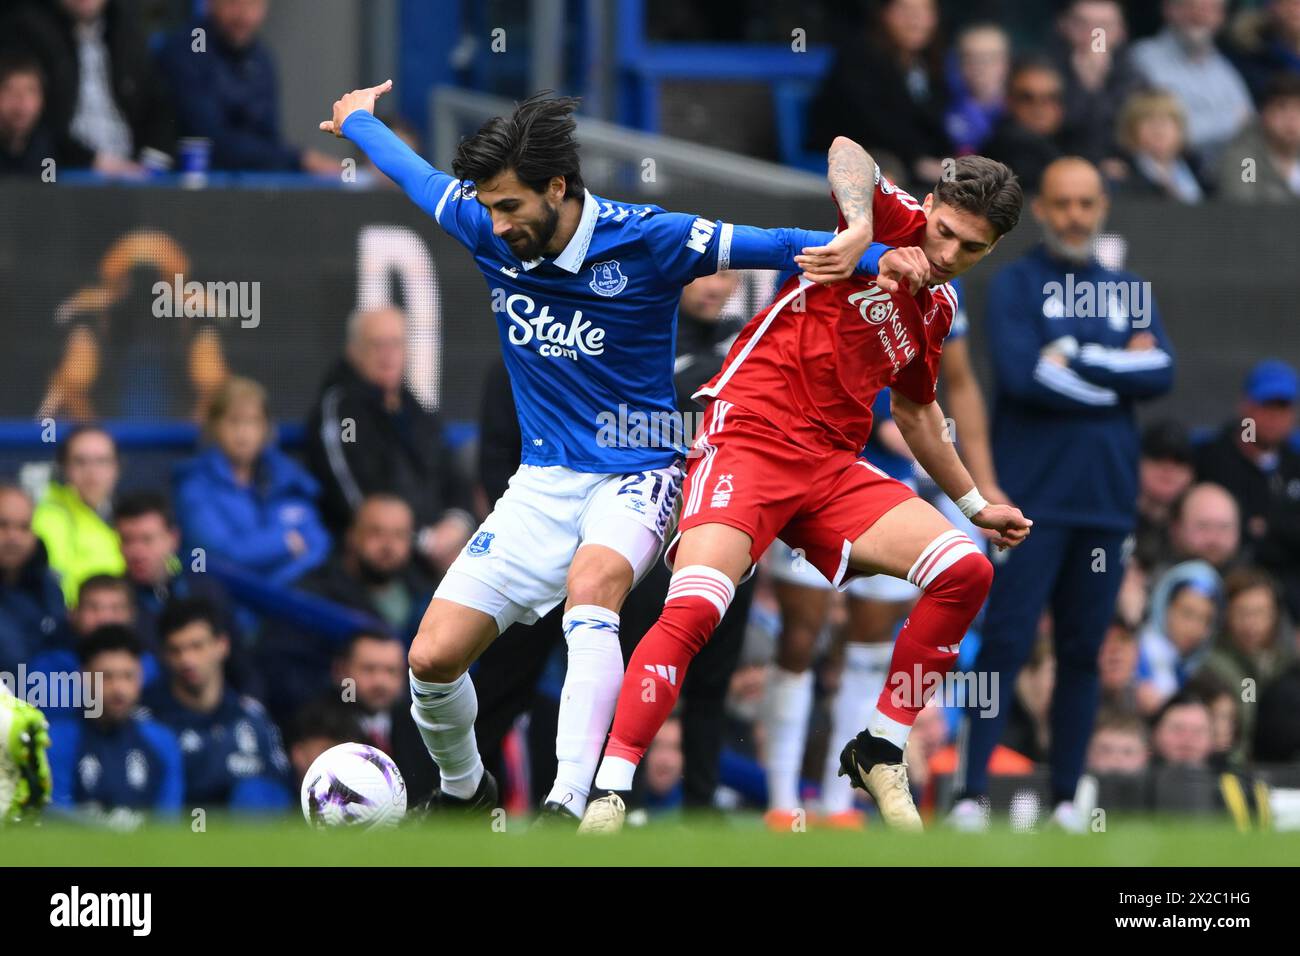 Goodison Park, Liverpool on Sunday 21st April 2024. Andre Gomes of Everton holds off Nicolas Dom'nguez of Nottingham Forest during the Premier League match between Everton and Nottingham Forest at Goodison Park, Liverpool on Sunday 21st April 2024. (Photo: Jon Hobley | MI News) Credit: MI News & Sport /Alamy Live News Stock Photo